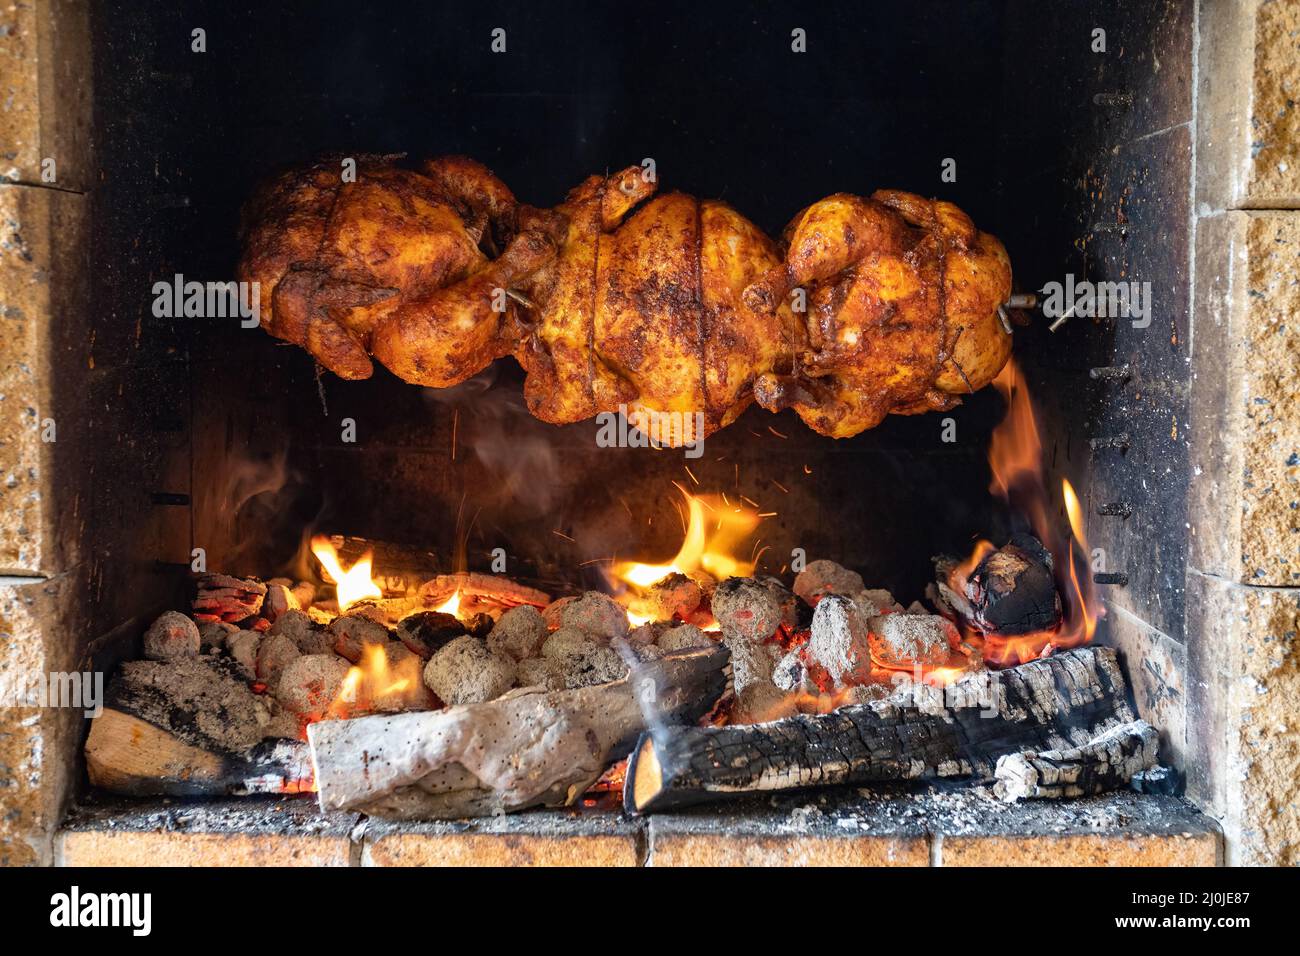 Chicken roasting on a spit Stock Photo